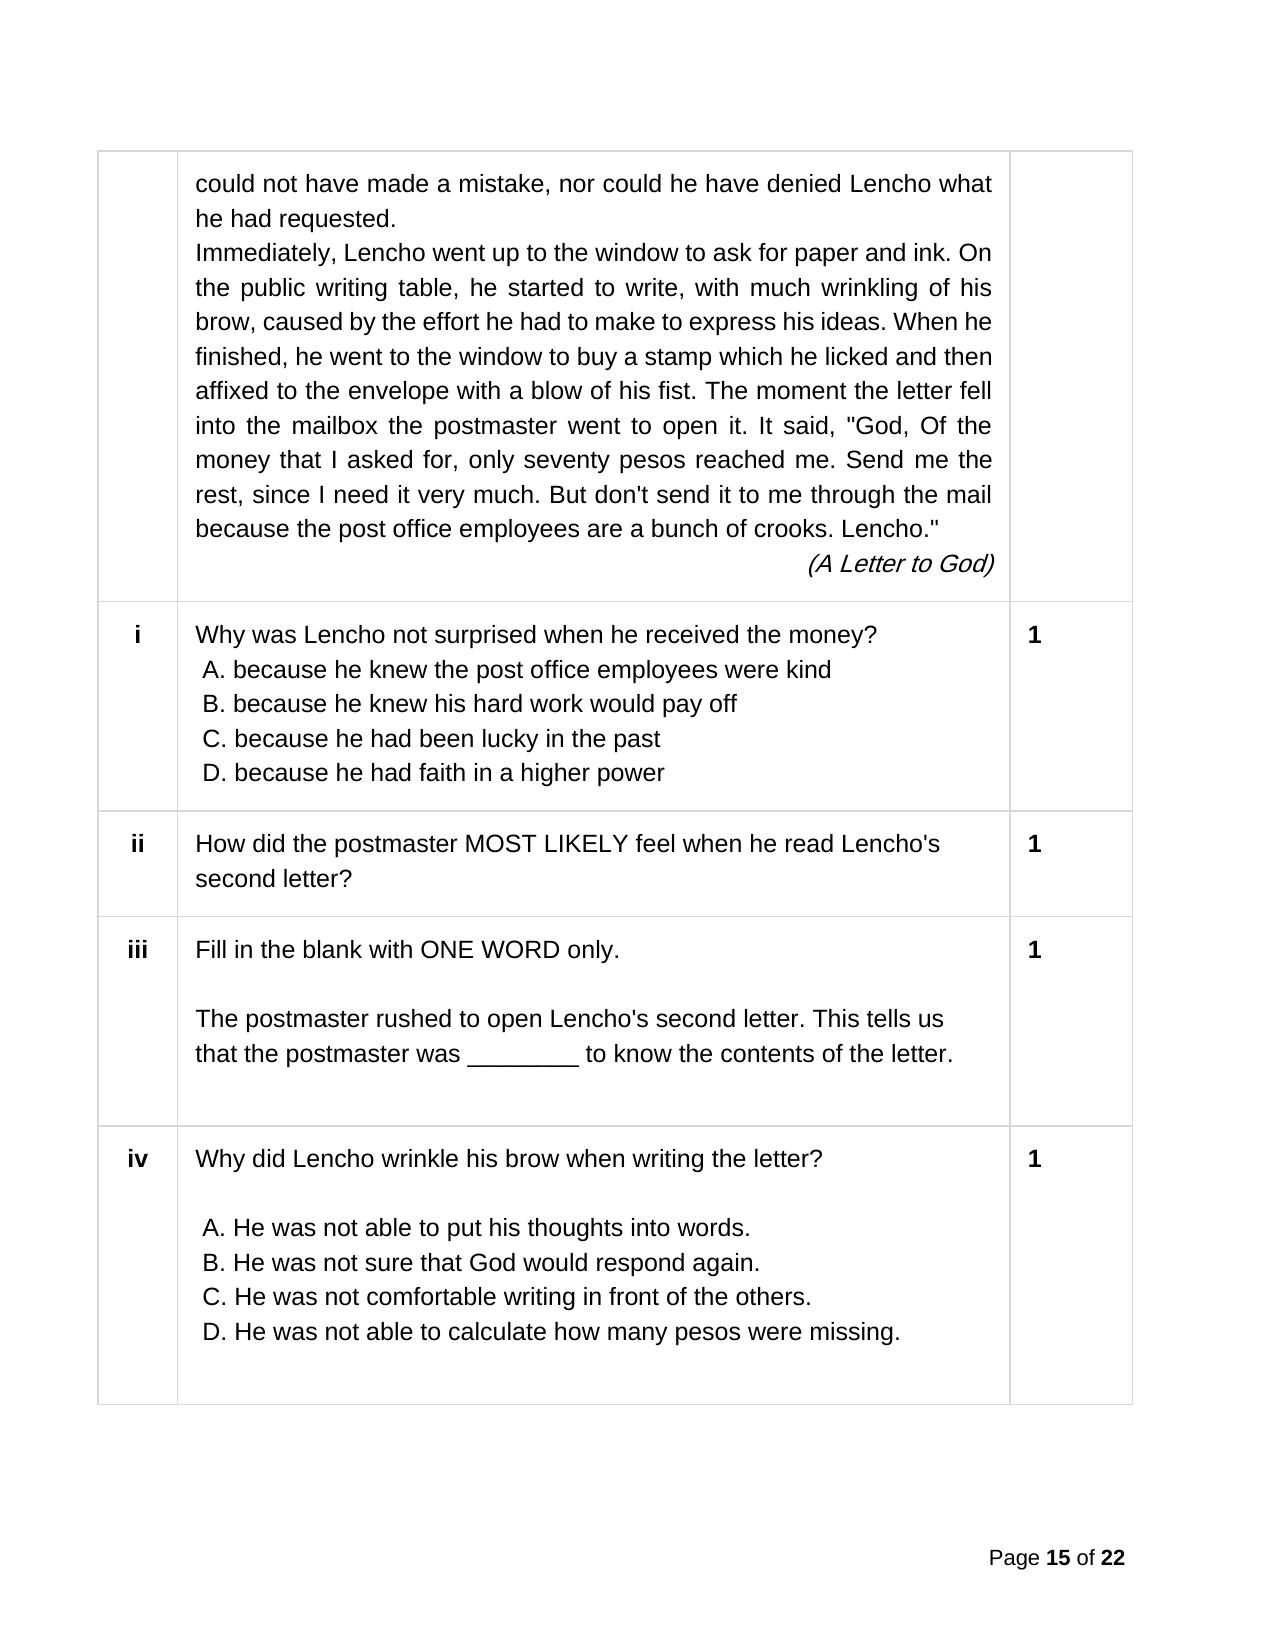 CBSE Class 10 English Practice Questions 2022-23 - Page 15